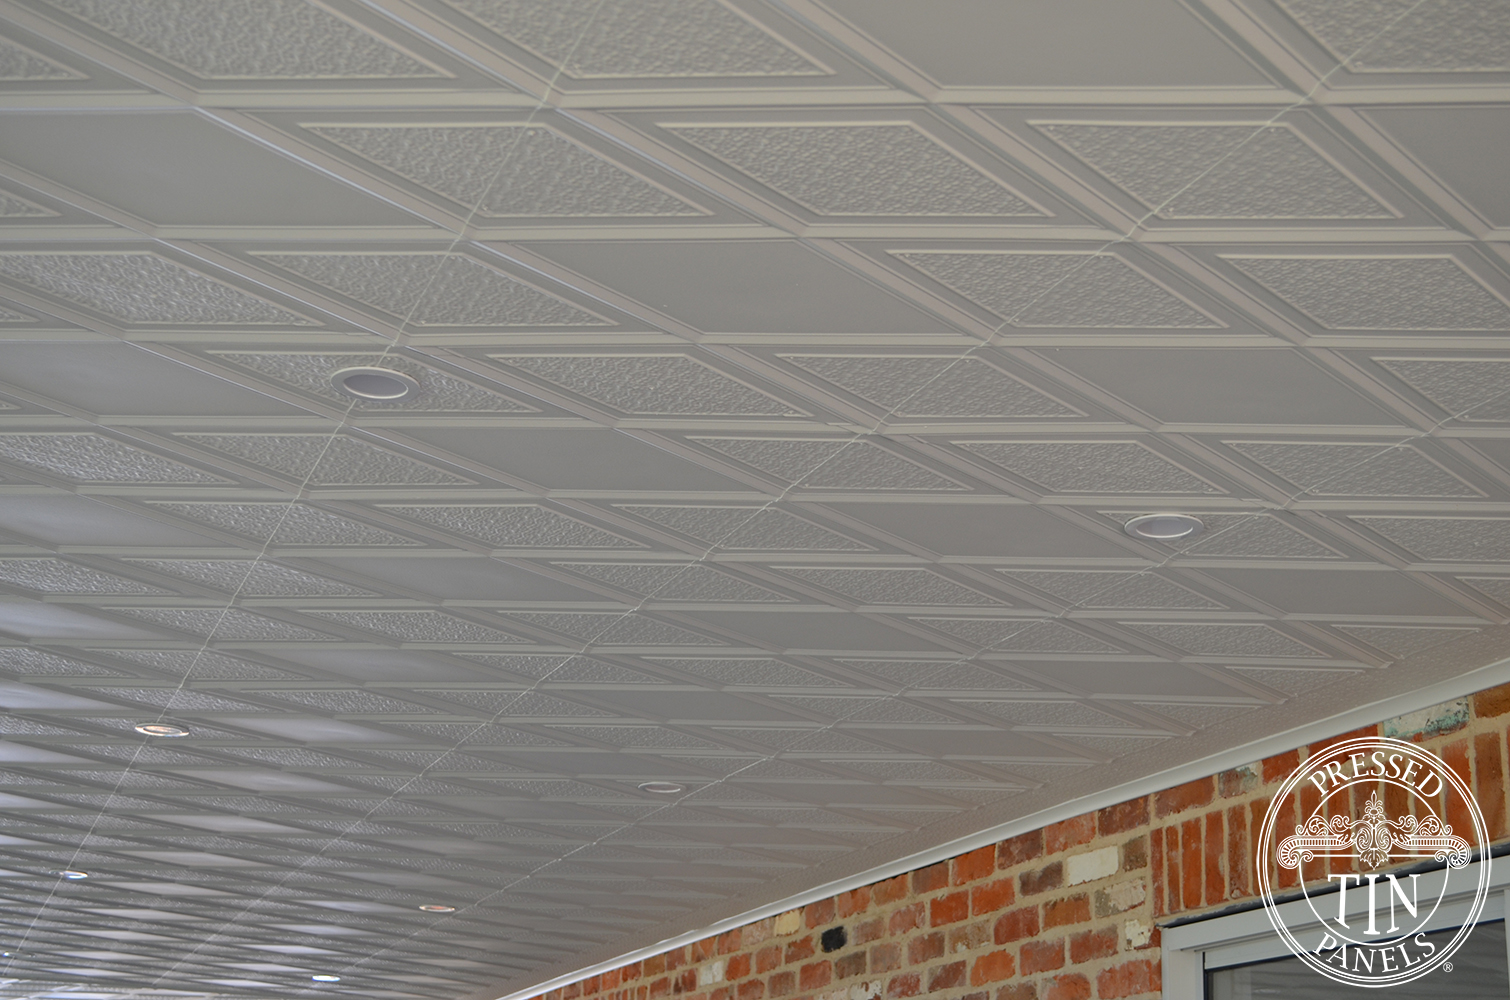 PressedTinPanels_CommercialBay_Awning_Ceiling